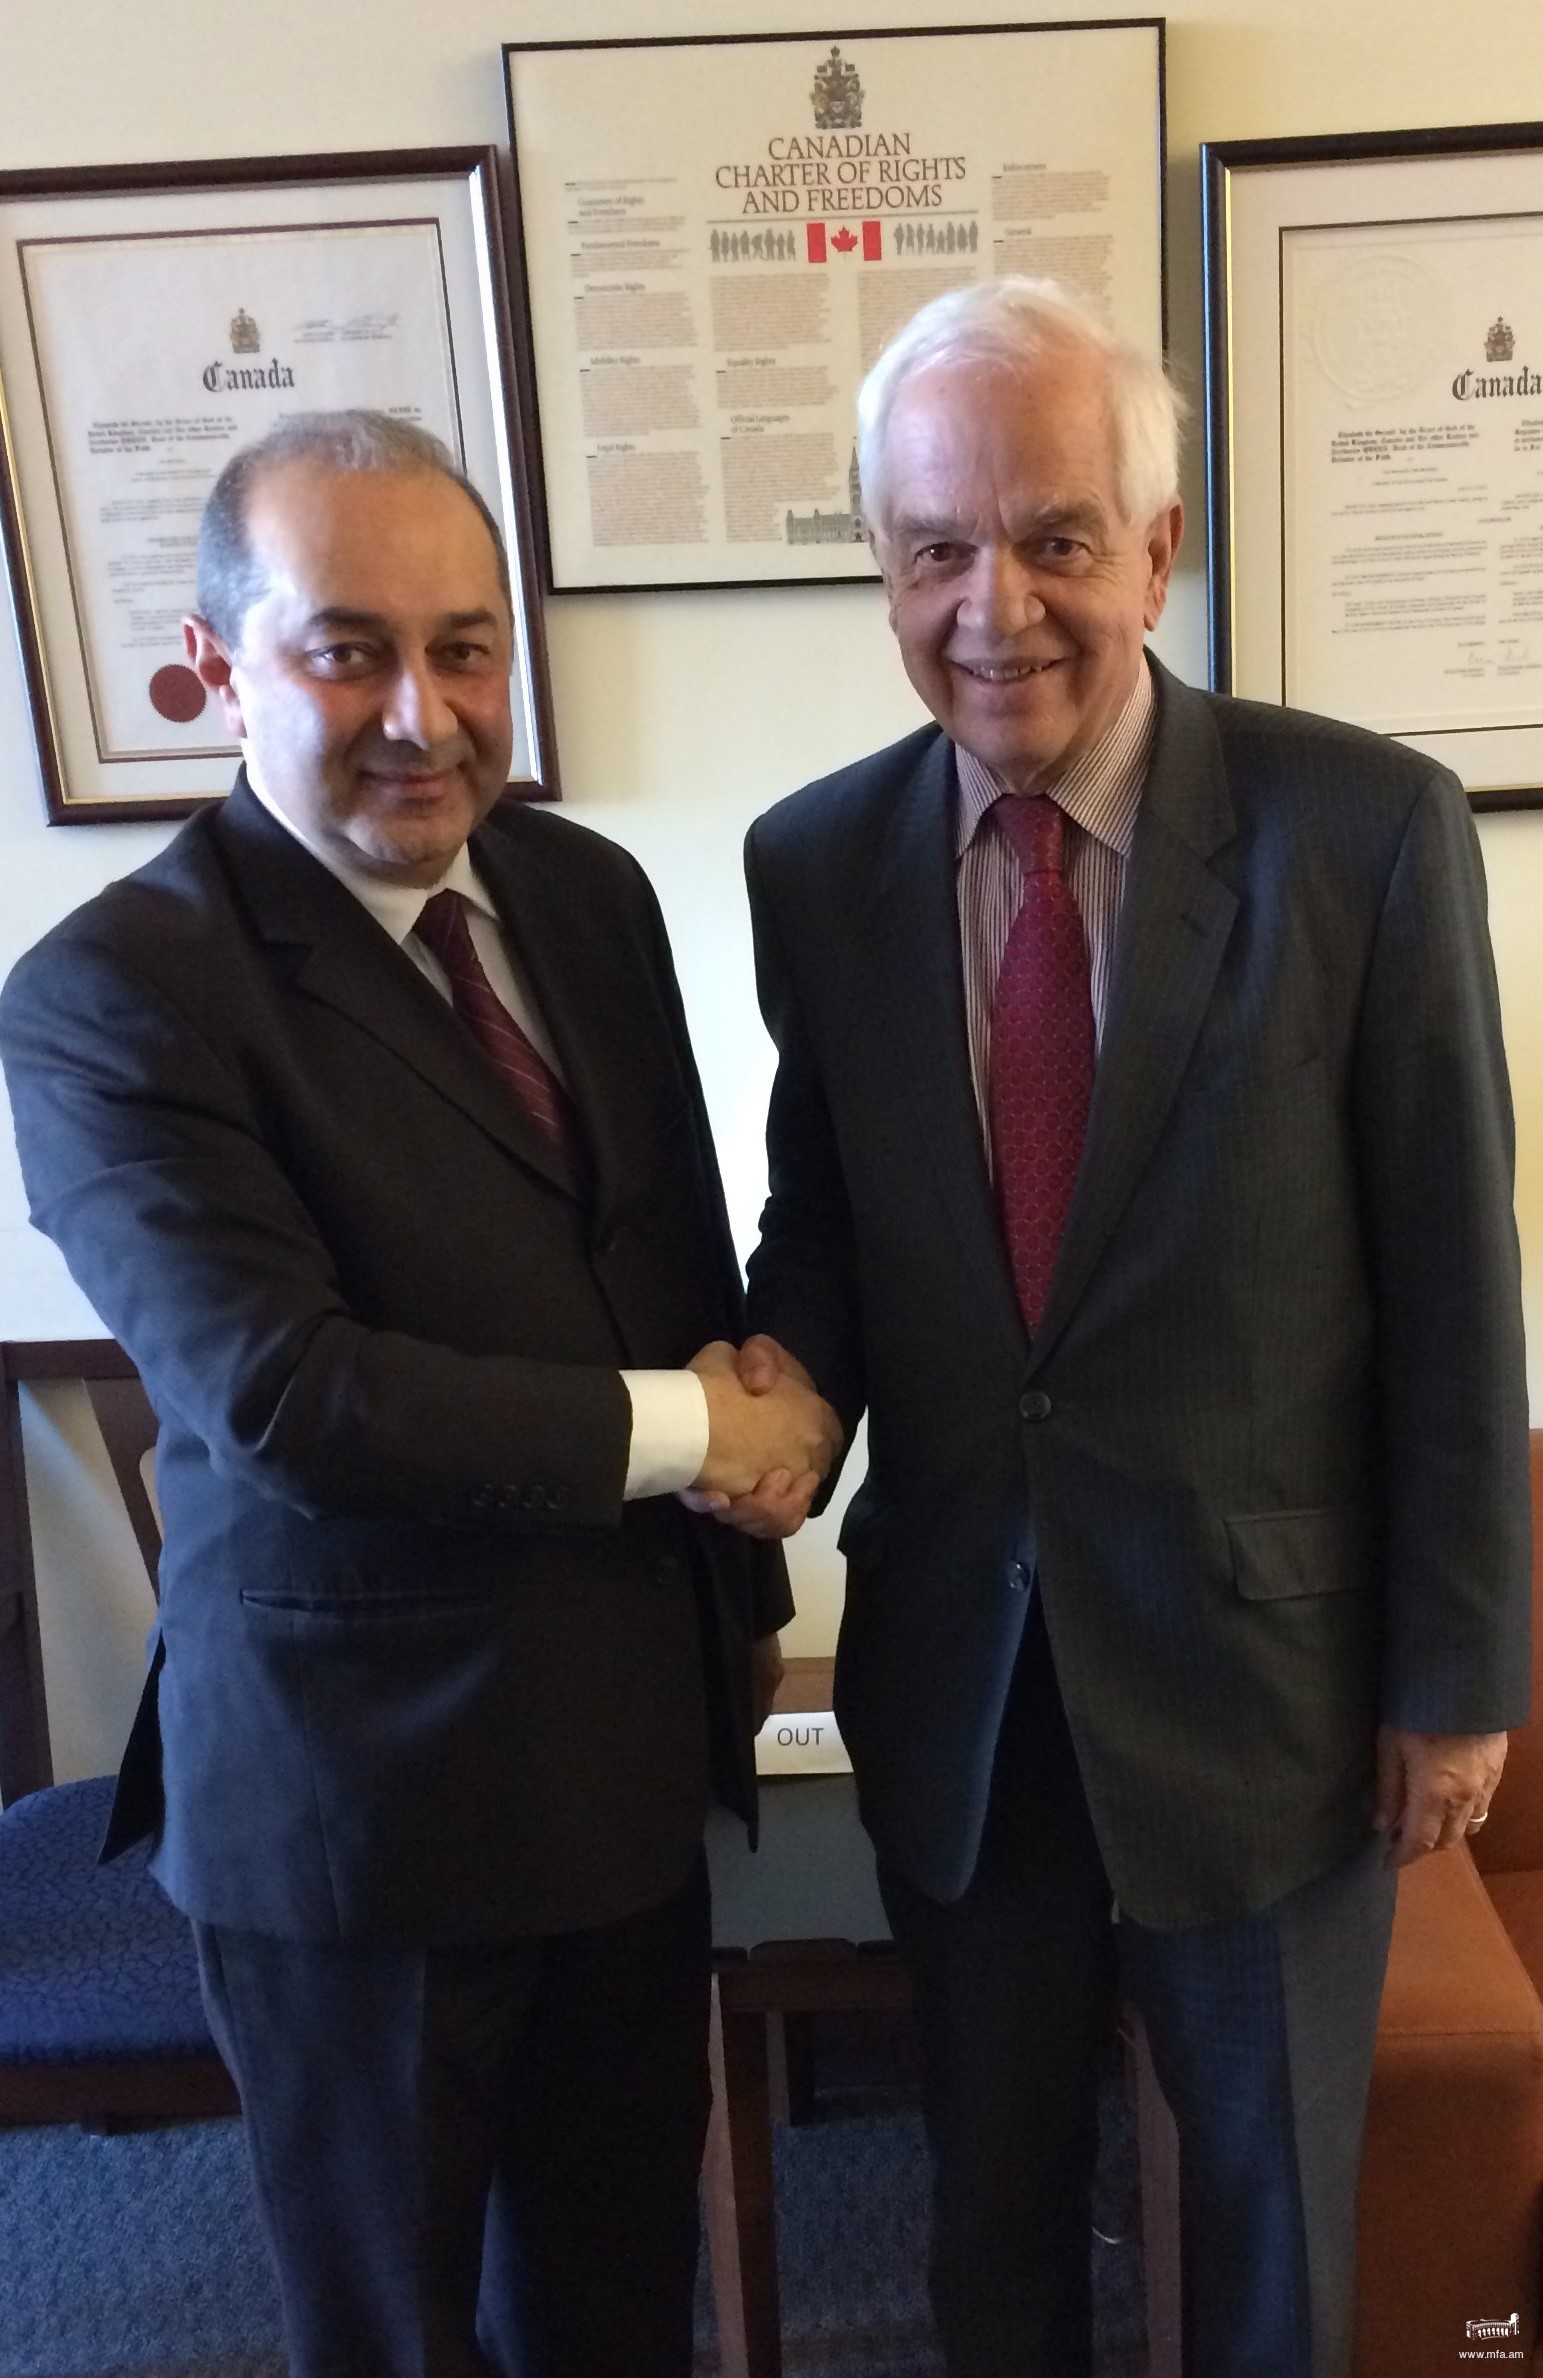 Ambassador Yeganian’s meeting with the Minister of Immigration, Refugees and Citizenship of Canada